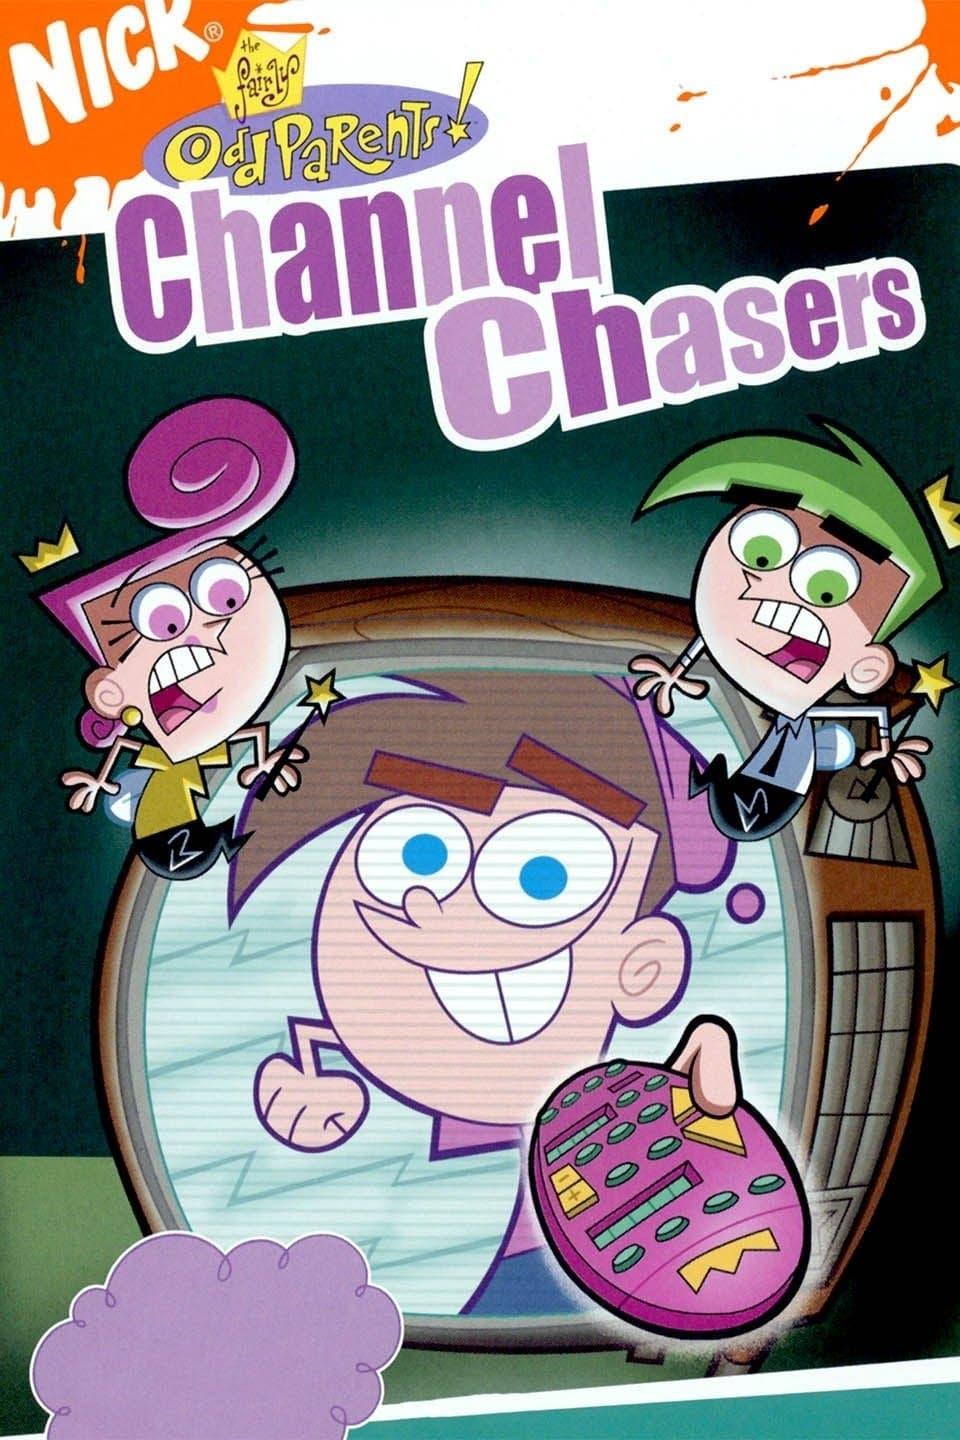 The Fairly OddParents: Channel Chasers poster